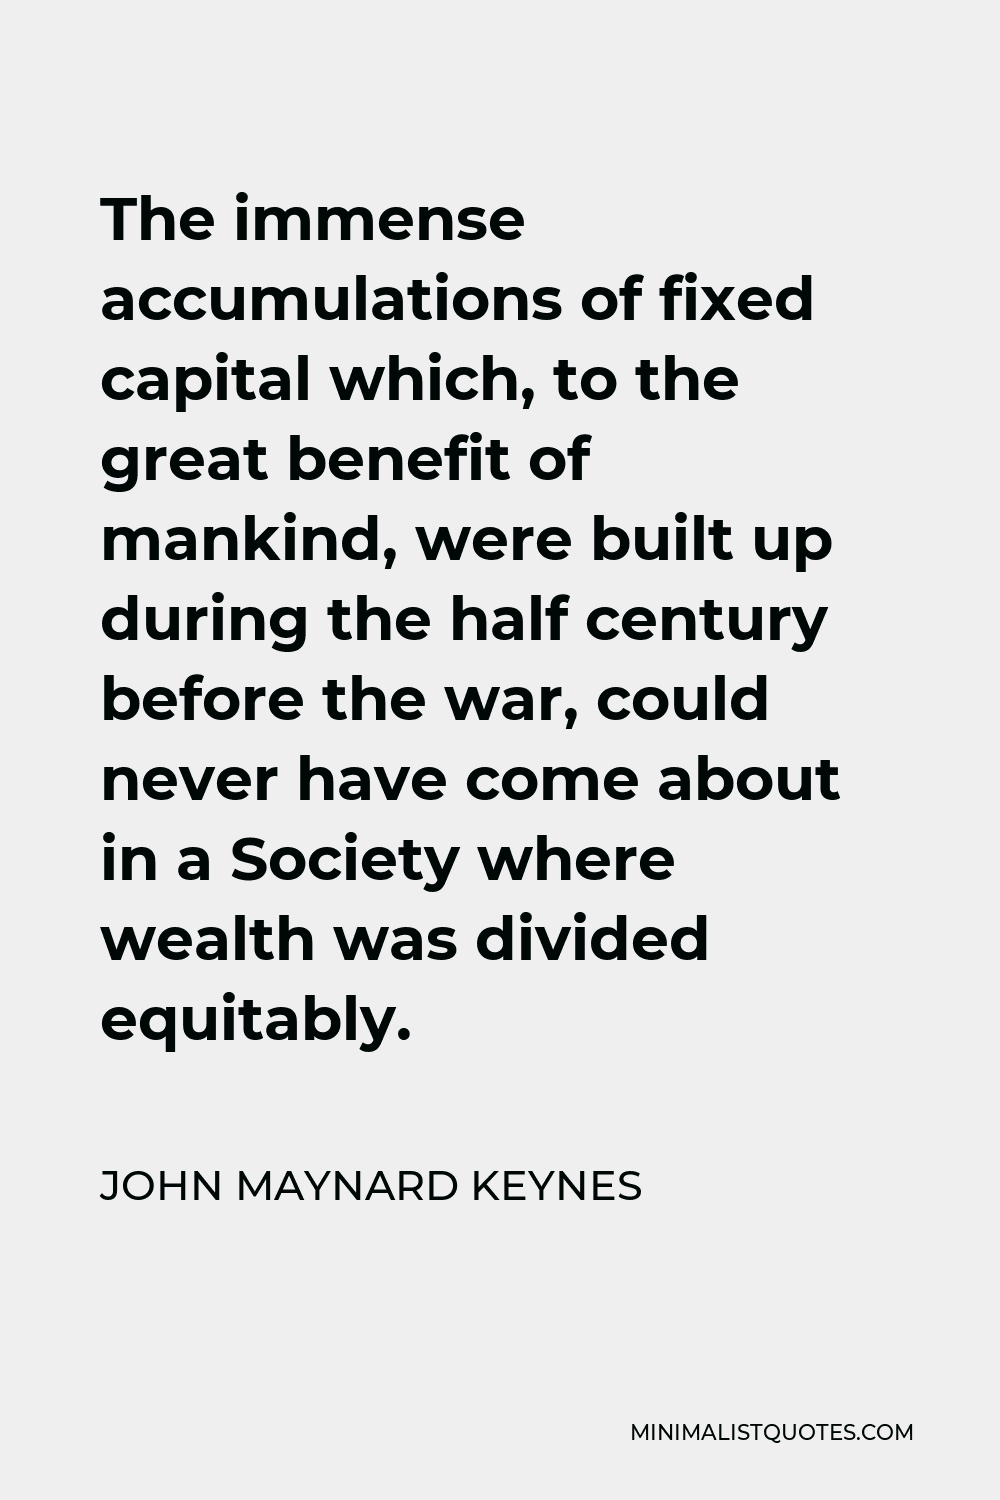 John Maynard Keynes Quote - The immense accumulations of fixed capital which, to the great benefit of mankind, were built up during the half century before the war, could never have come about in a Society where wealth was divided equitably.